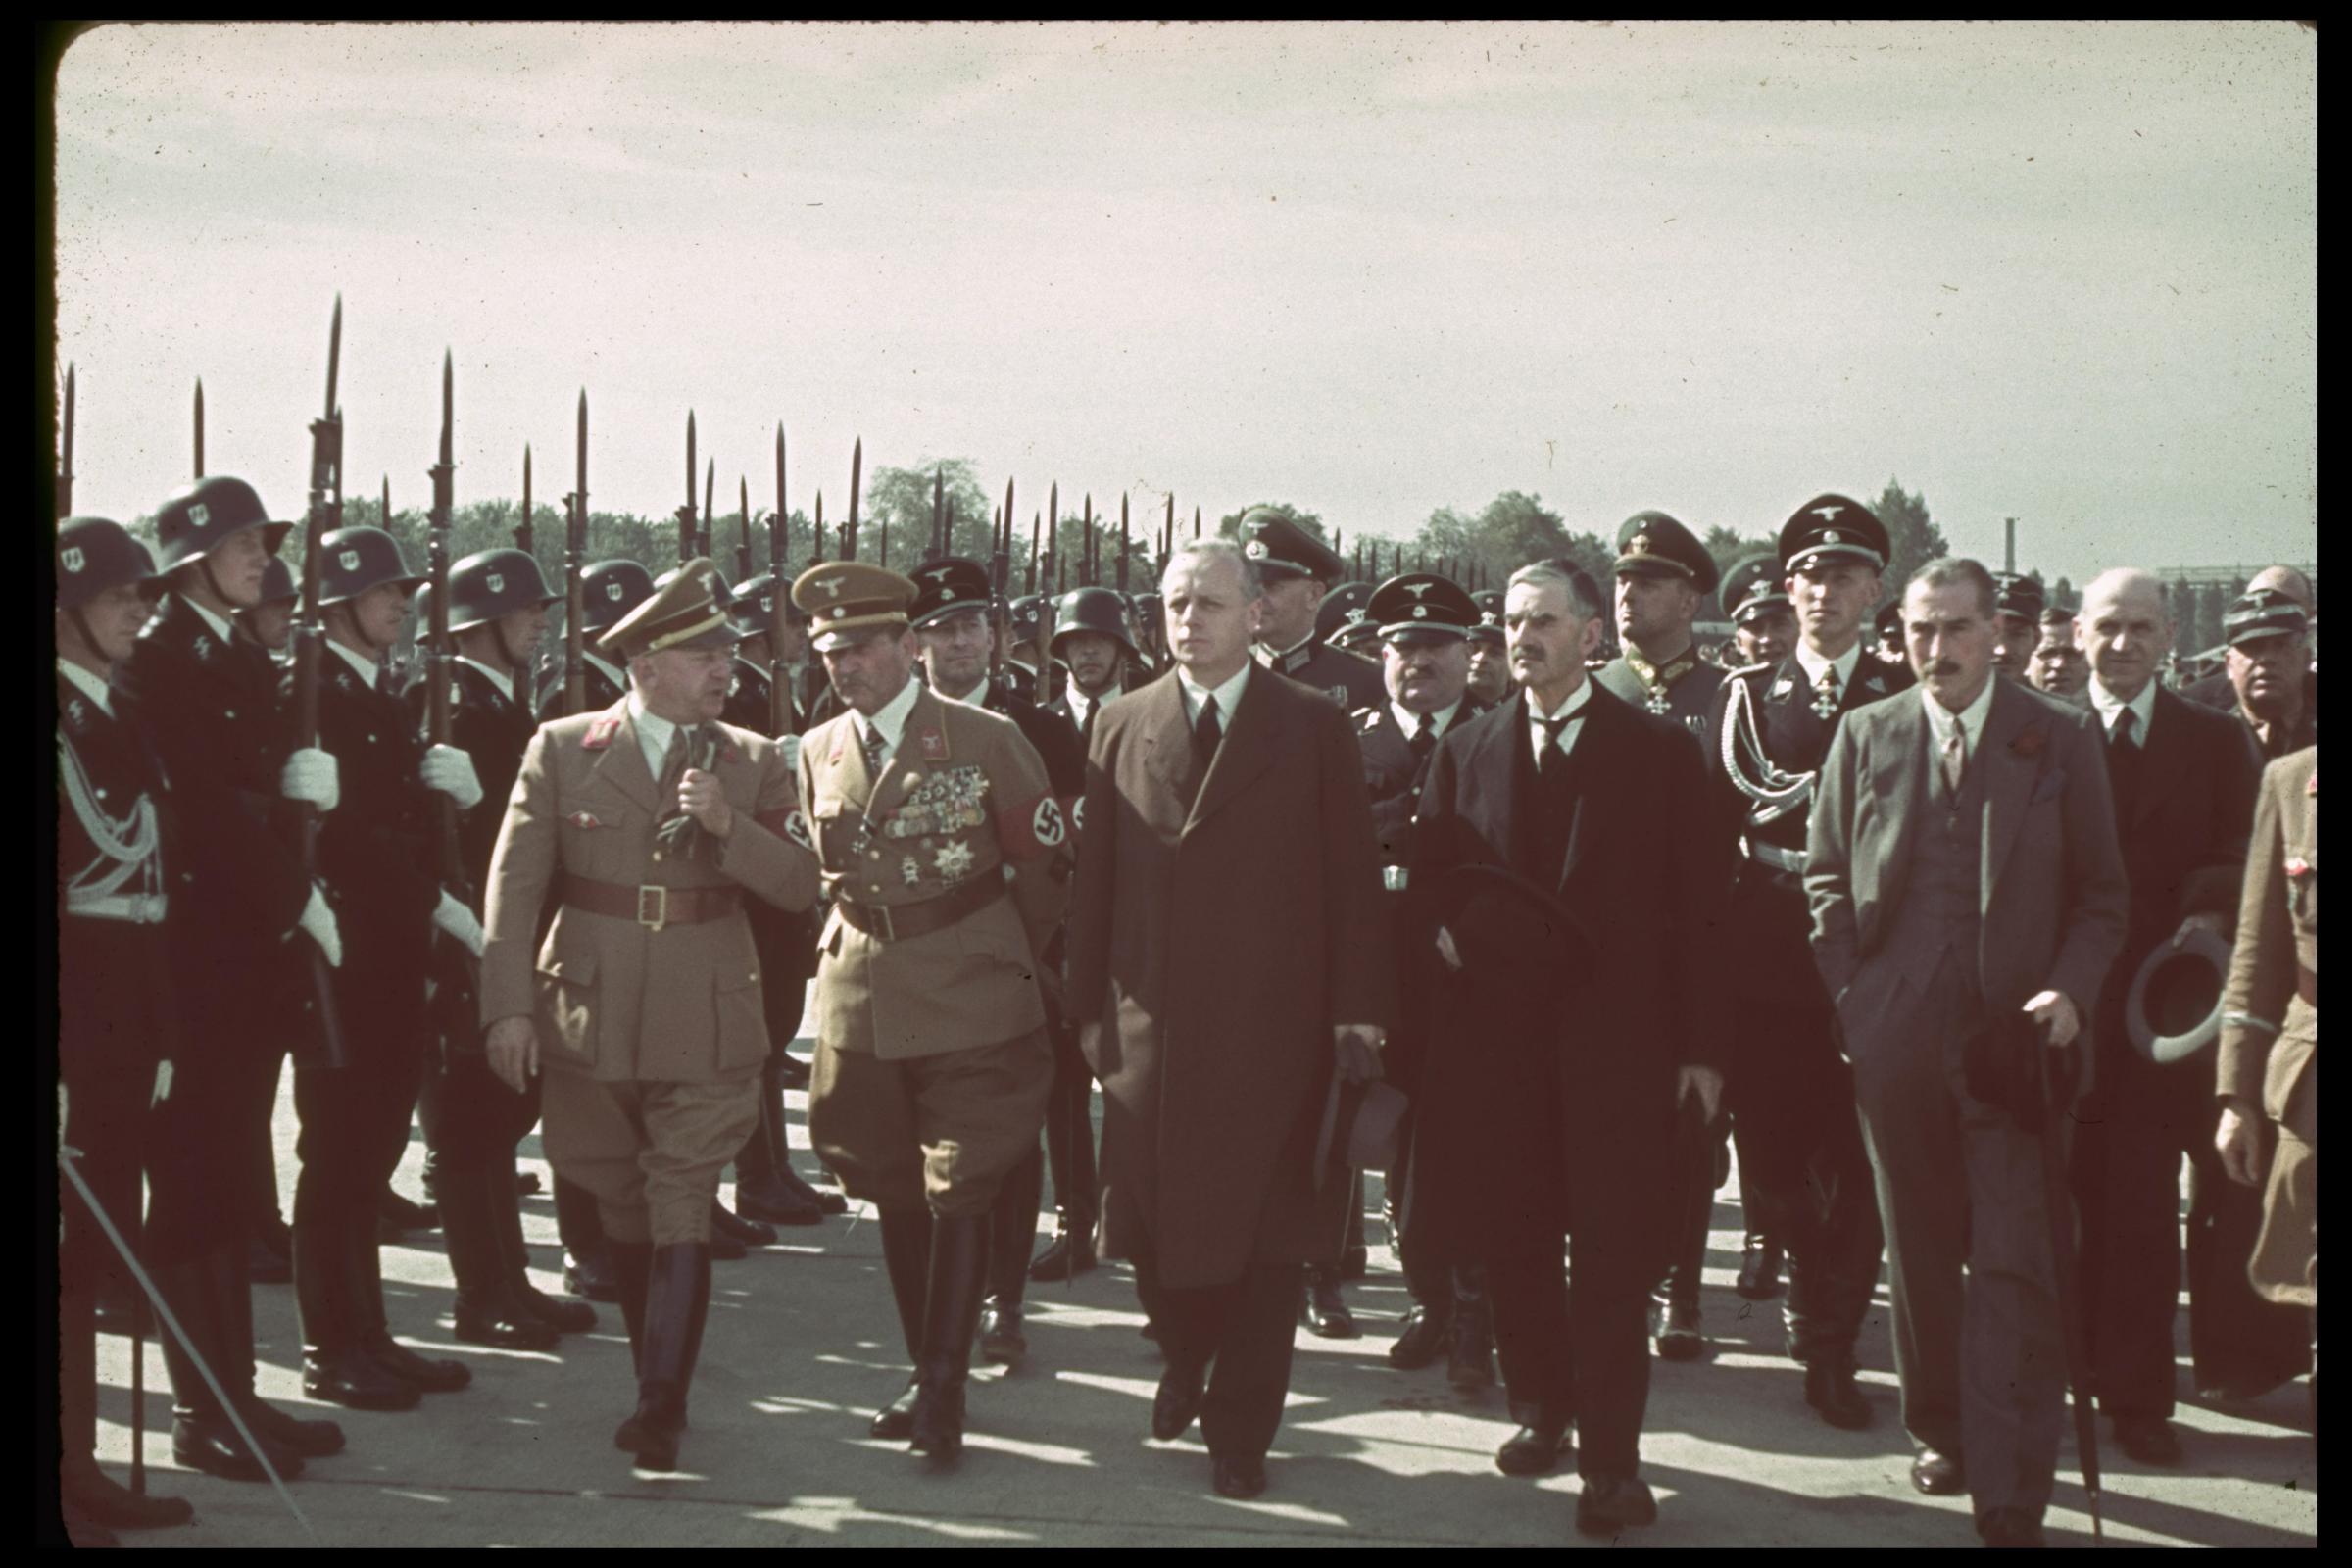 British Prime Minister Neville Chamberlain (front row, second from right) walks past a Nazi honor guard on the way to a meeting with Adolf Hitler in 1938.